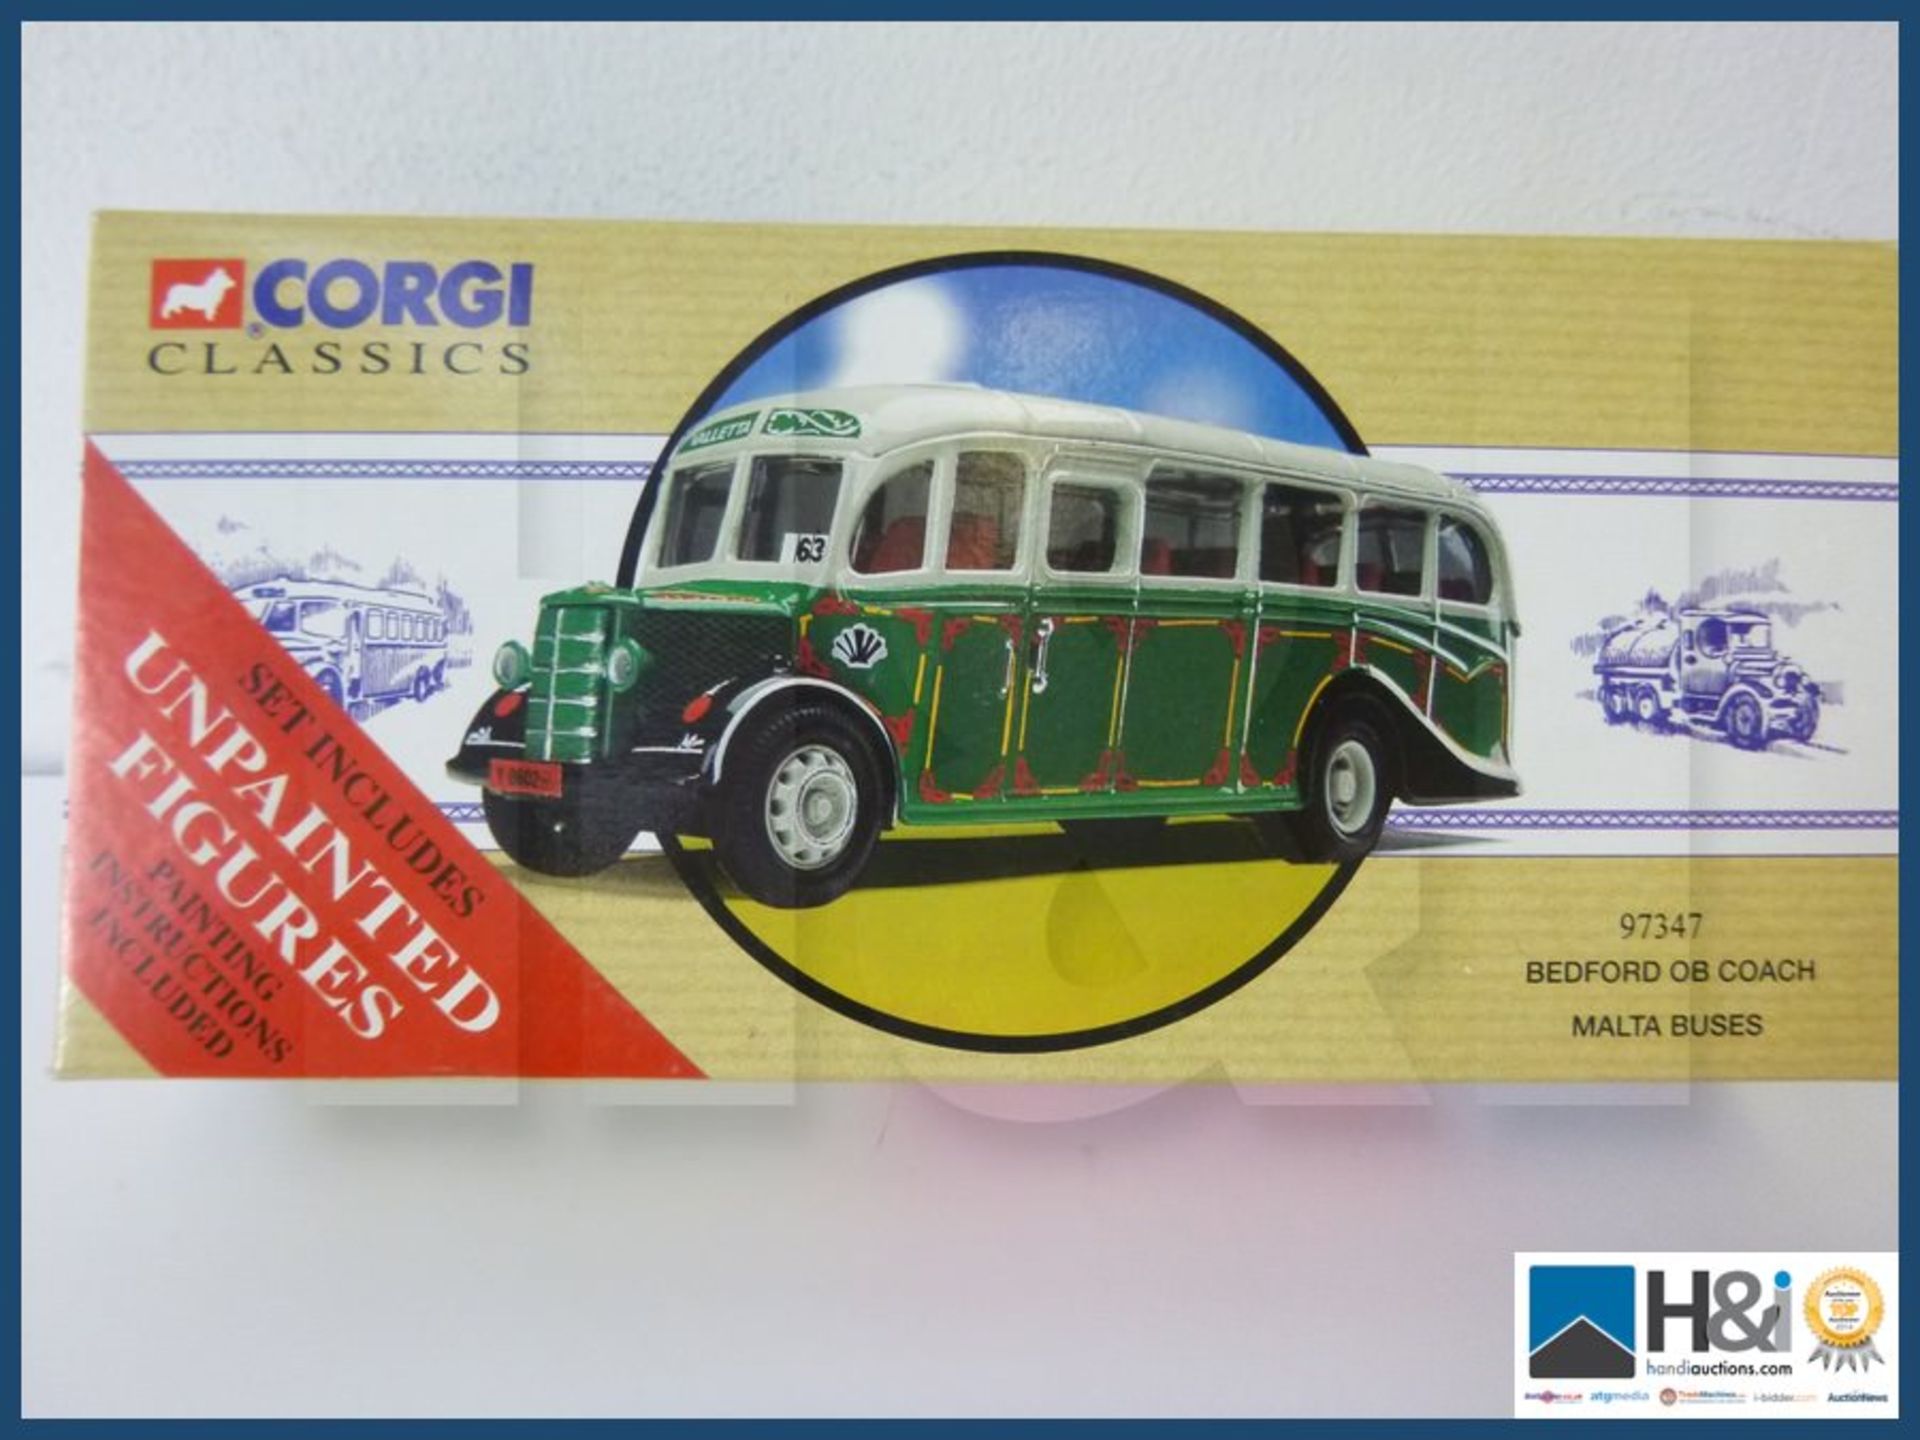 Corgi Bedford OB Coach Malta bus. Set includes unpainted figures. Painting instructions included. - Image 3 of 3